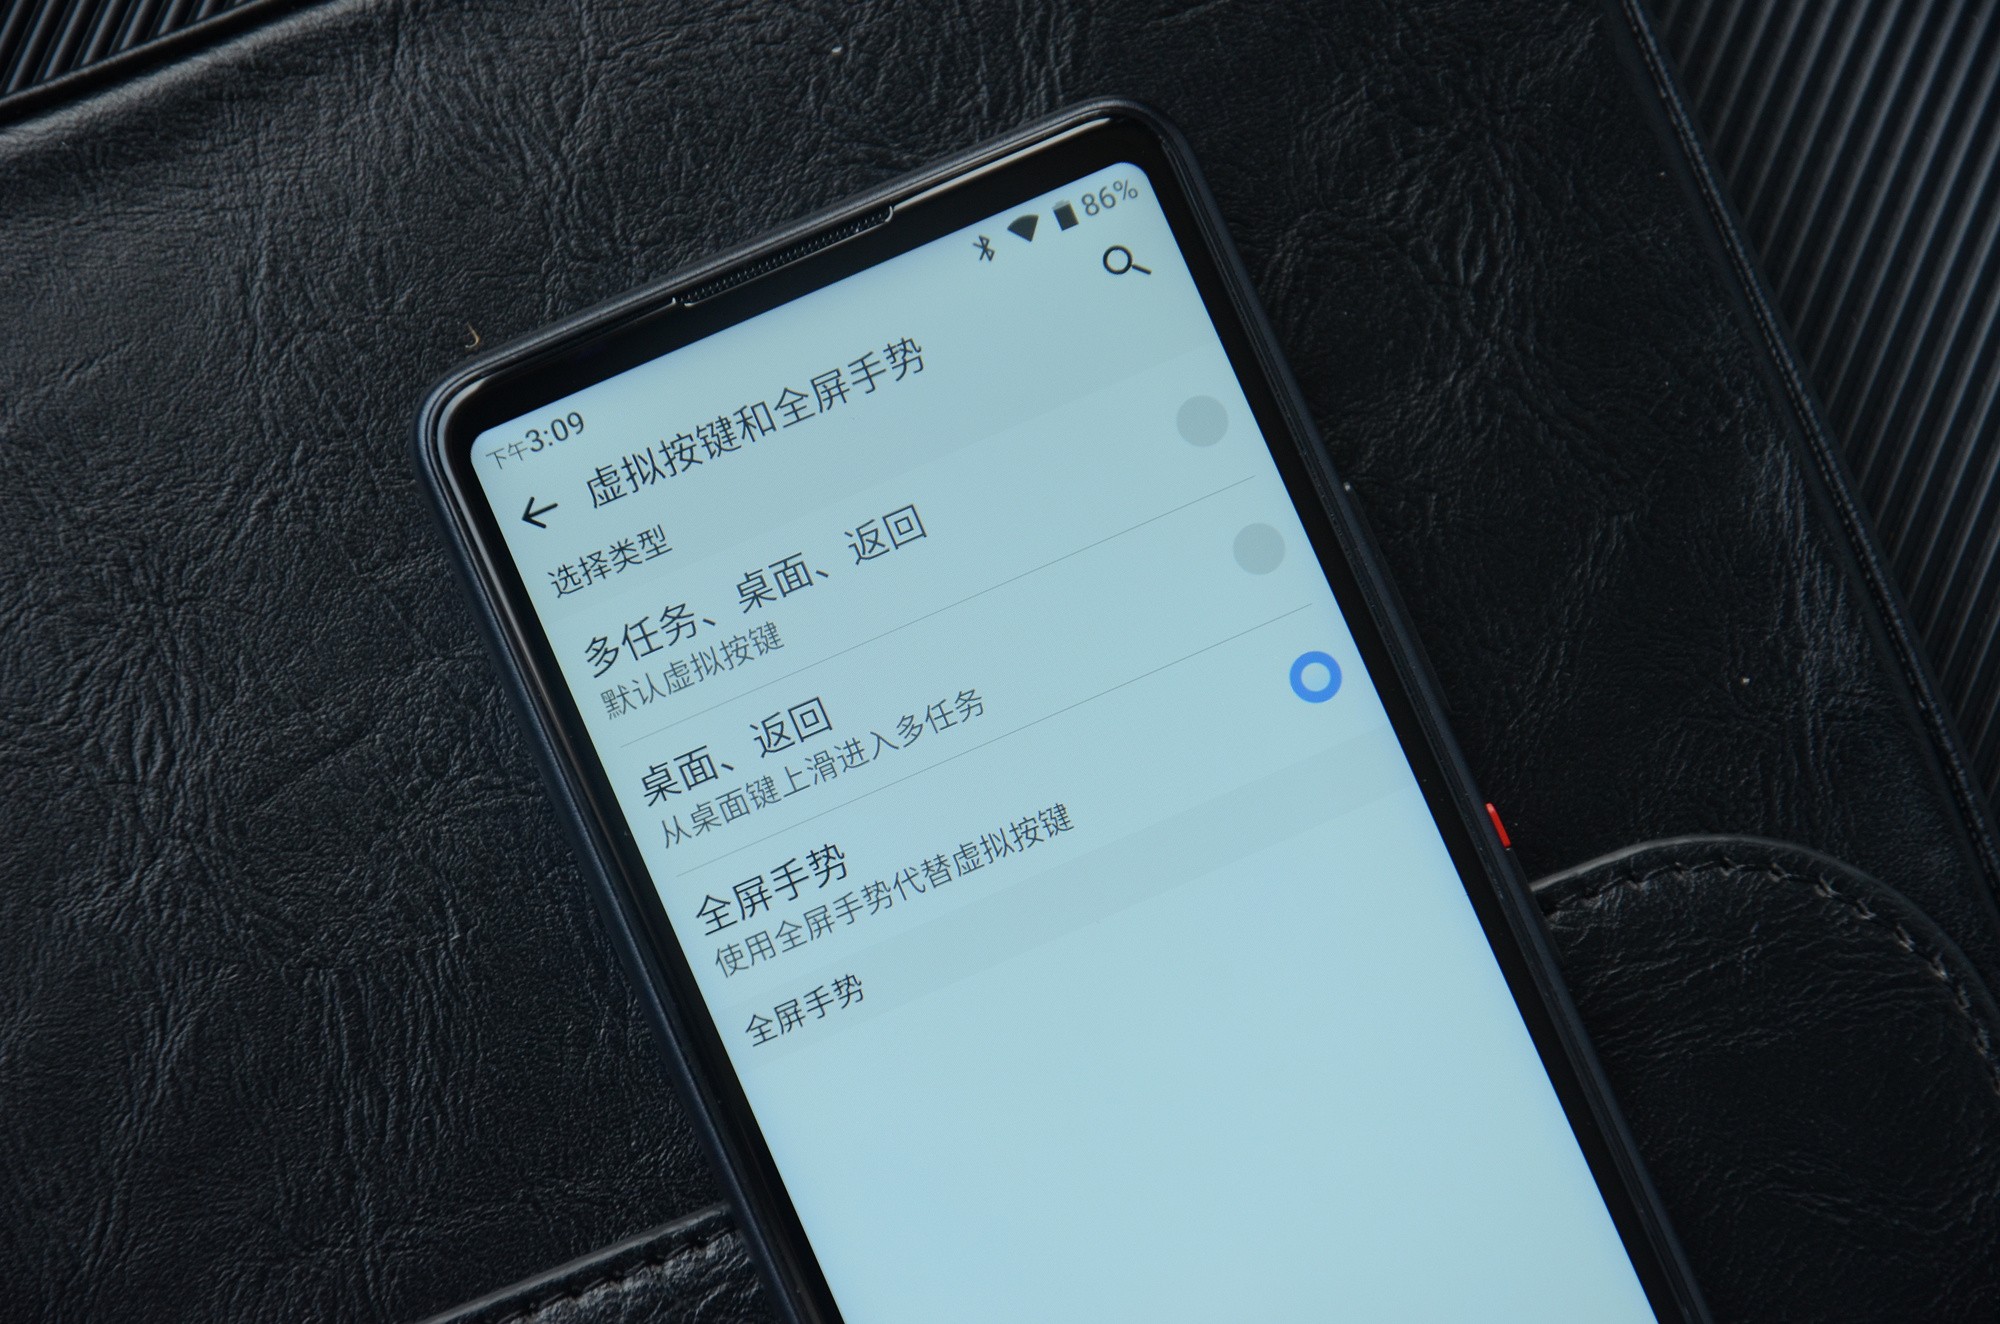 Xiaomi showed the simplest Qin 2 smartphone without a selfie camera